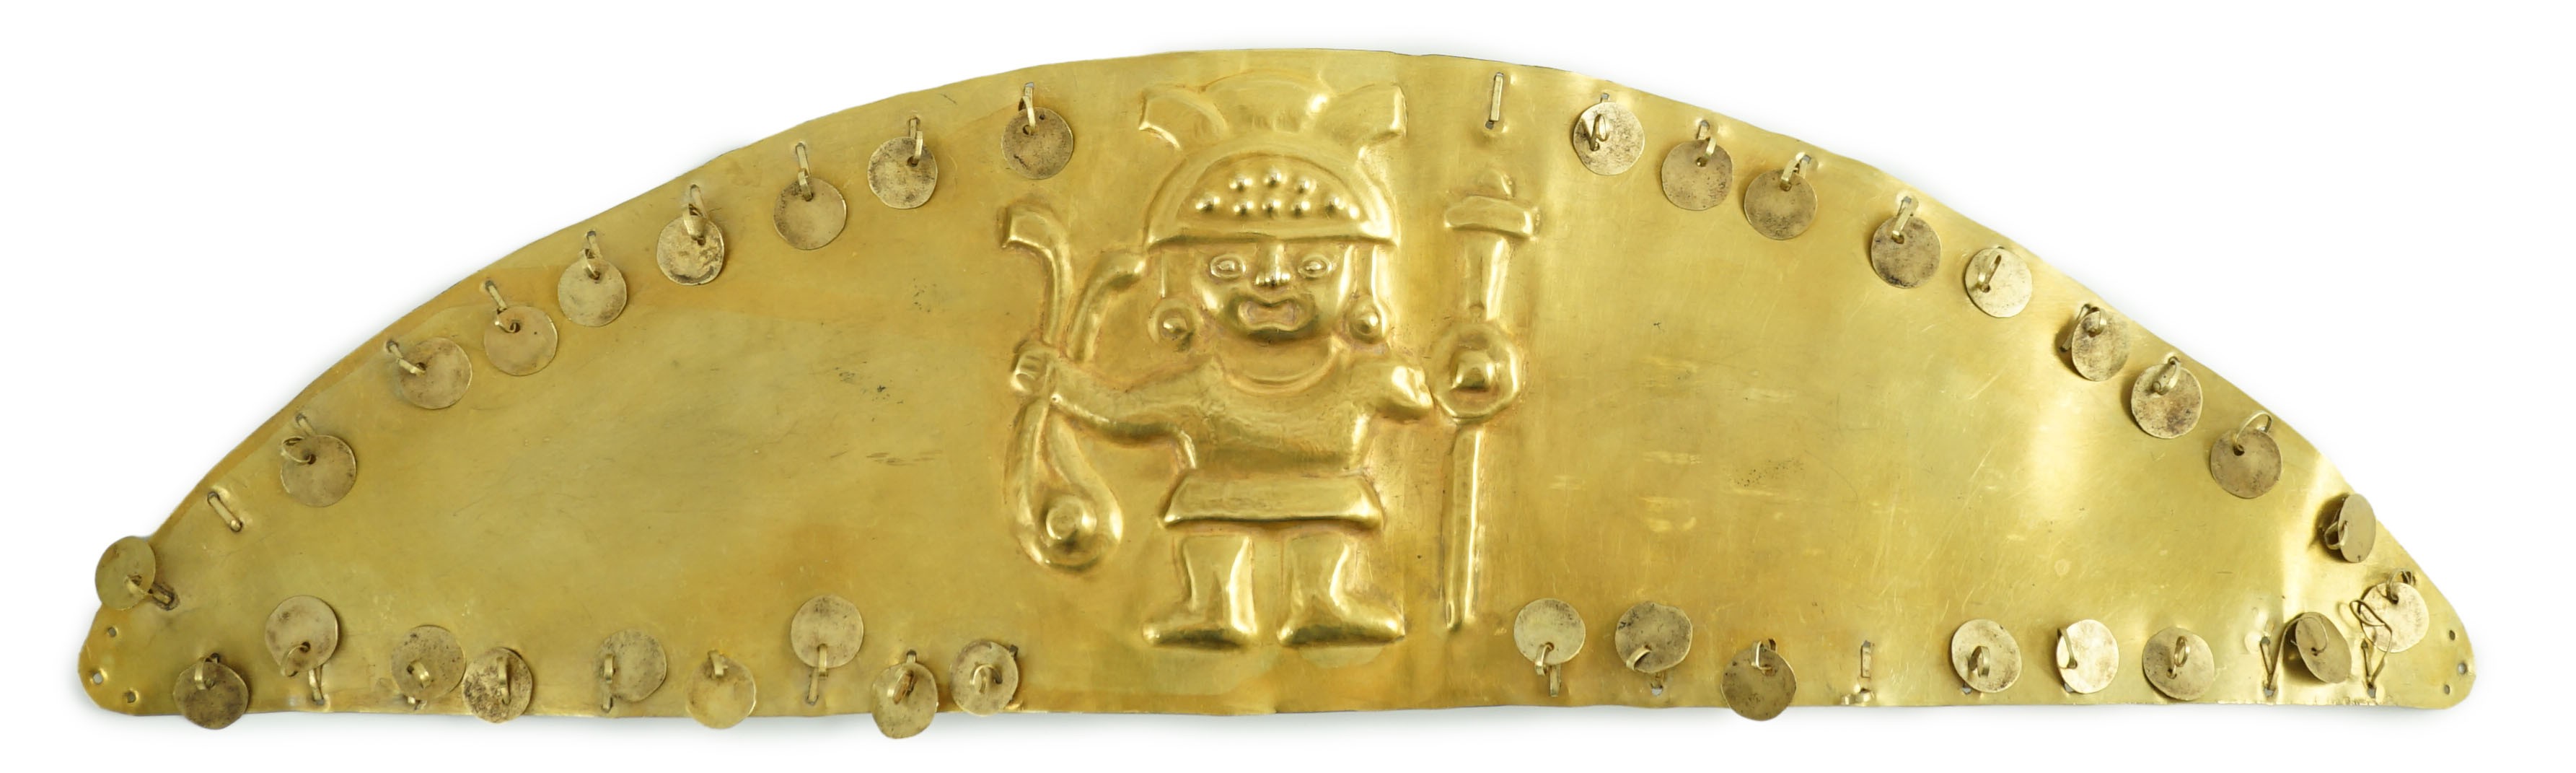 A rare pre-Columbian sheet gold headdress or breast plate, possibly Moche culture, Northern Peru, A.D. 200 - 850, 36cm wide 9.7cm high, weight 130g                                                                         